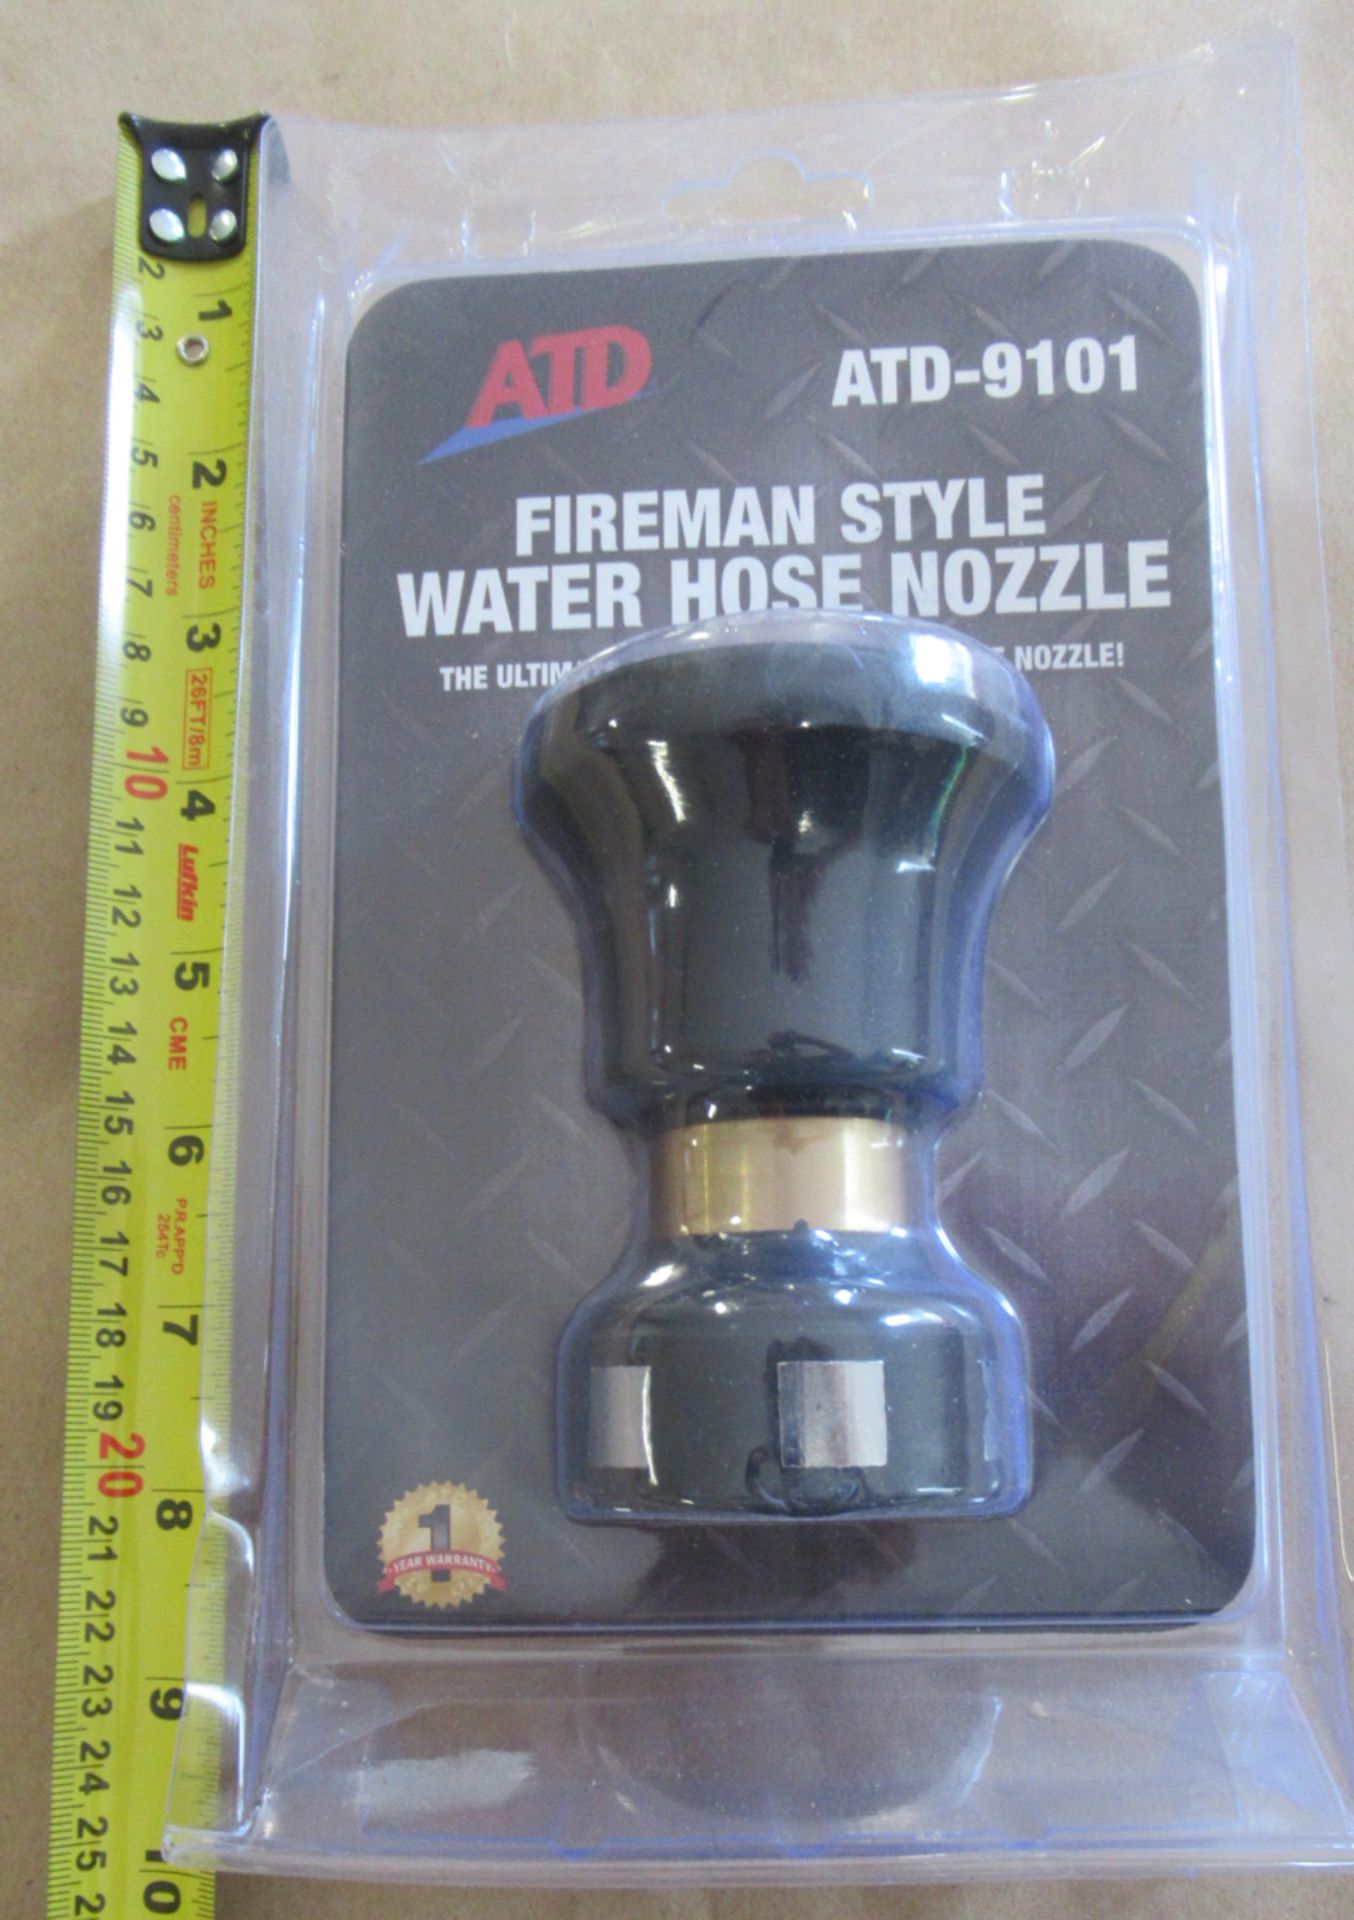 FIREMAN STYLE WATER HOSE NOZZLE ATD-9101